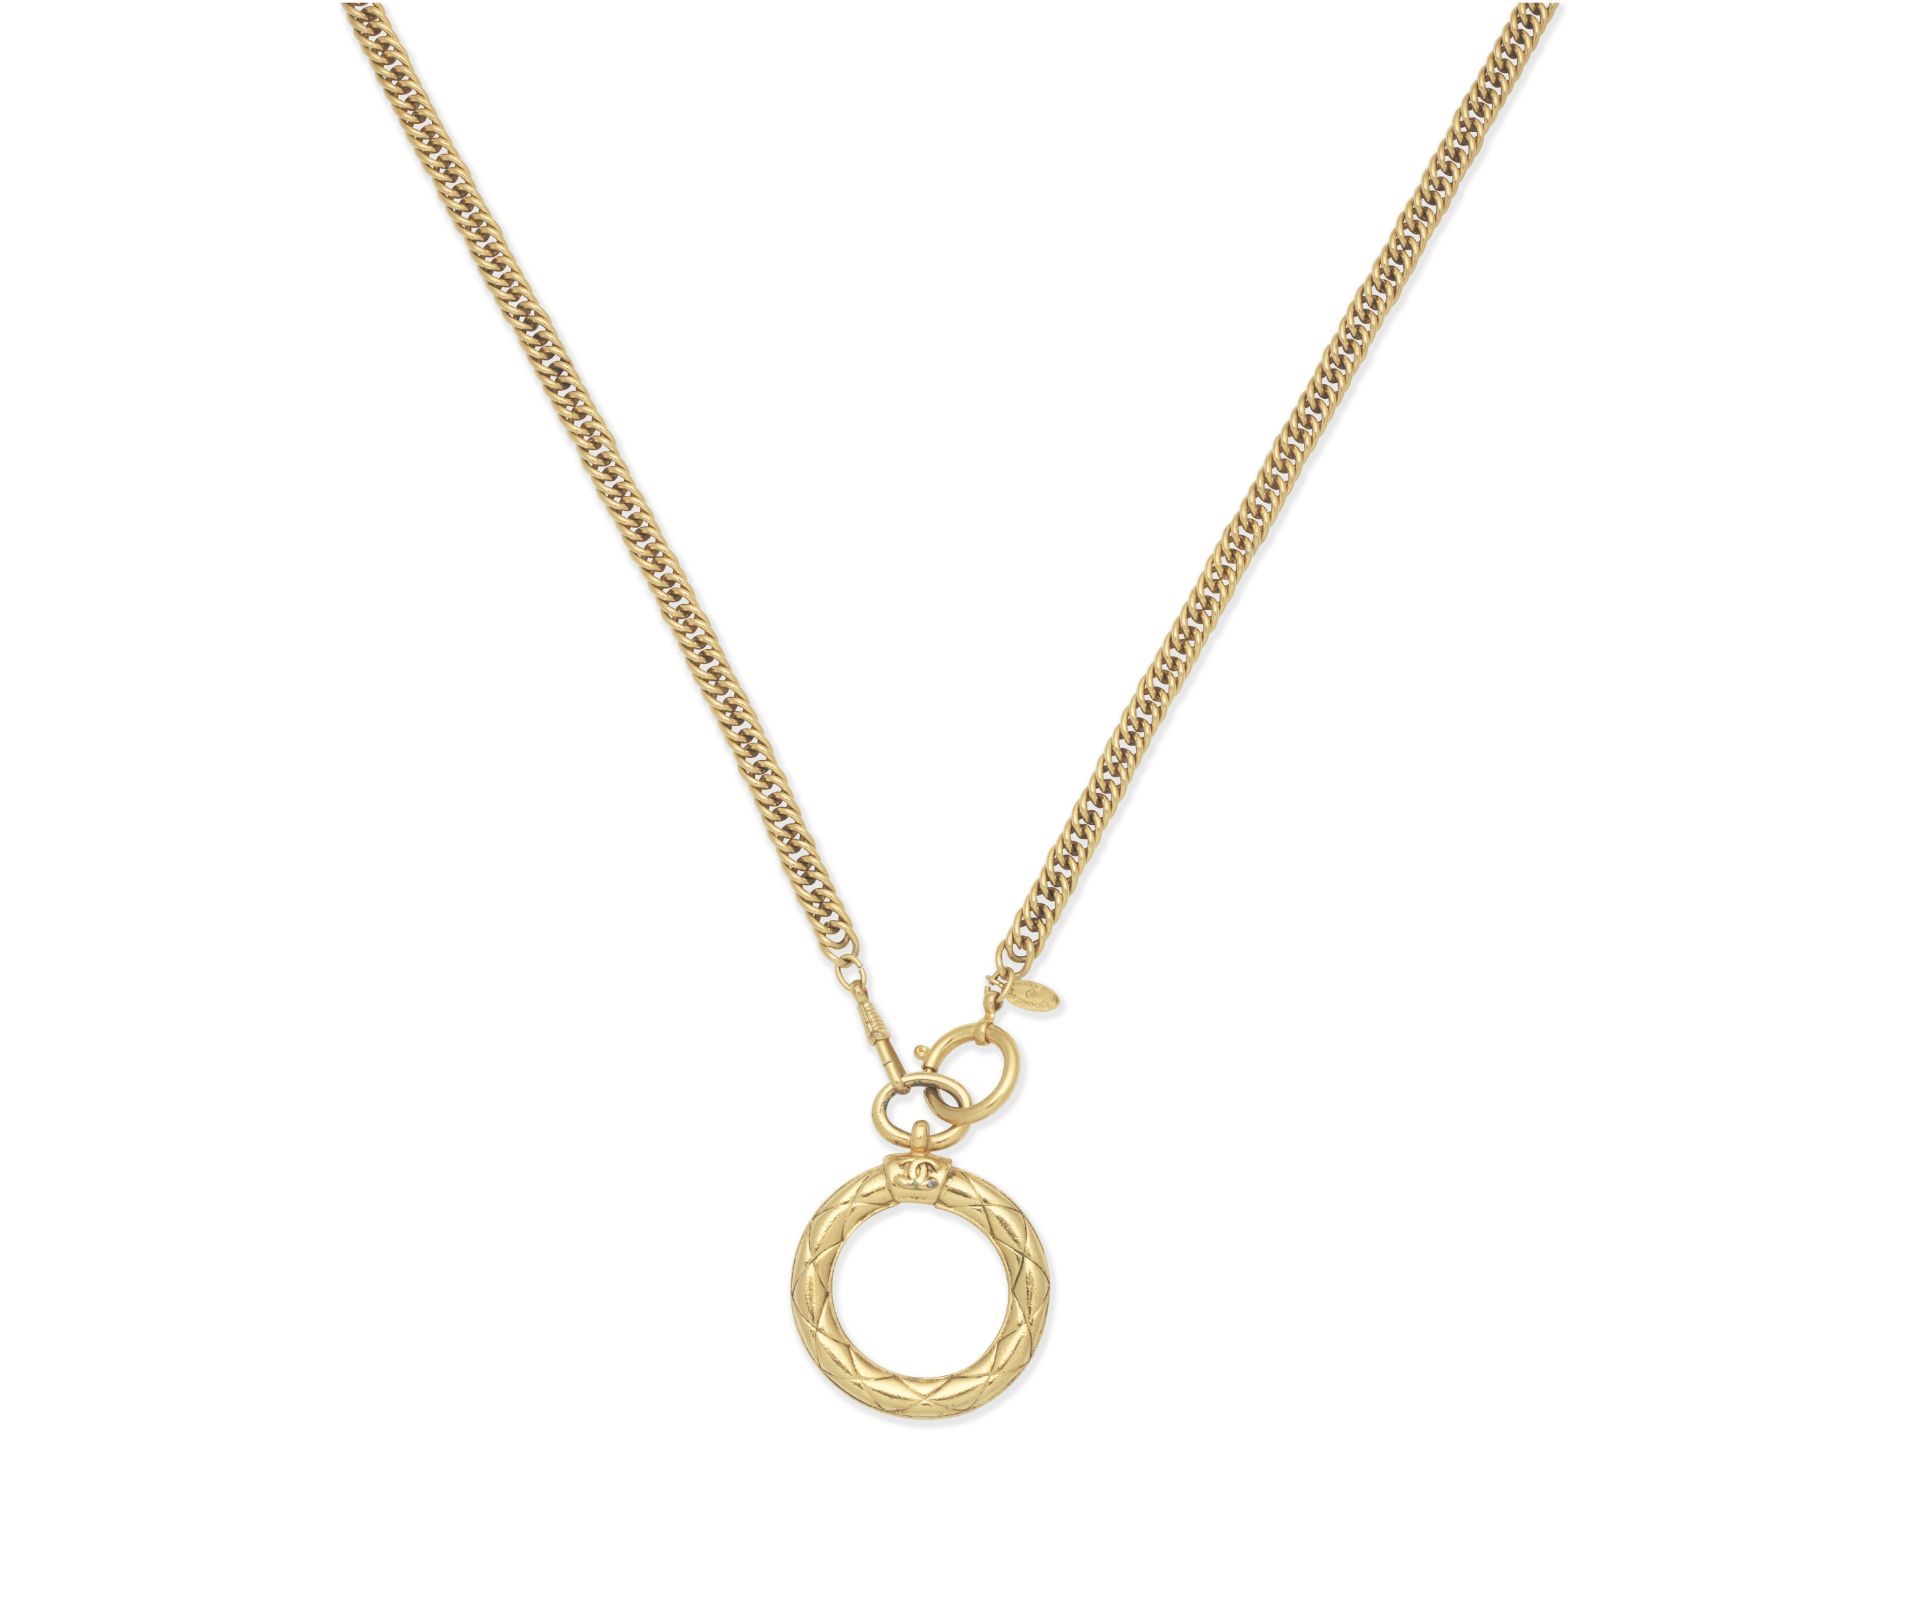 Magnifying Glass Necklace, Chanel, 1970s,